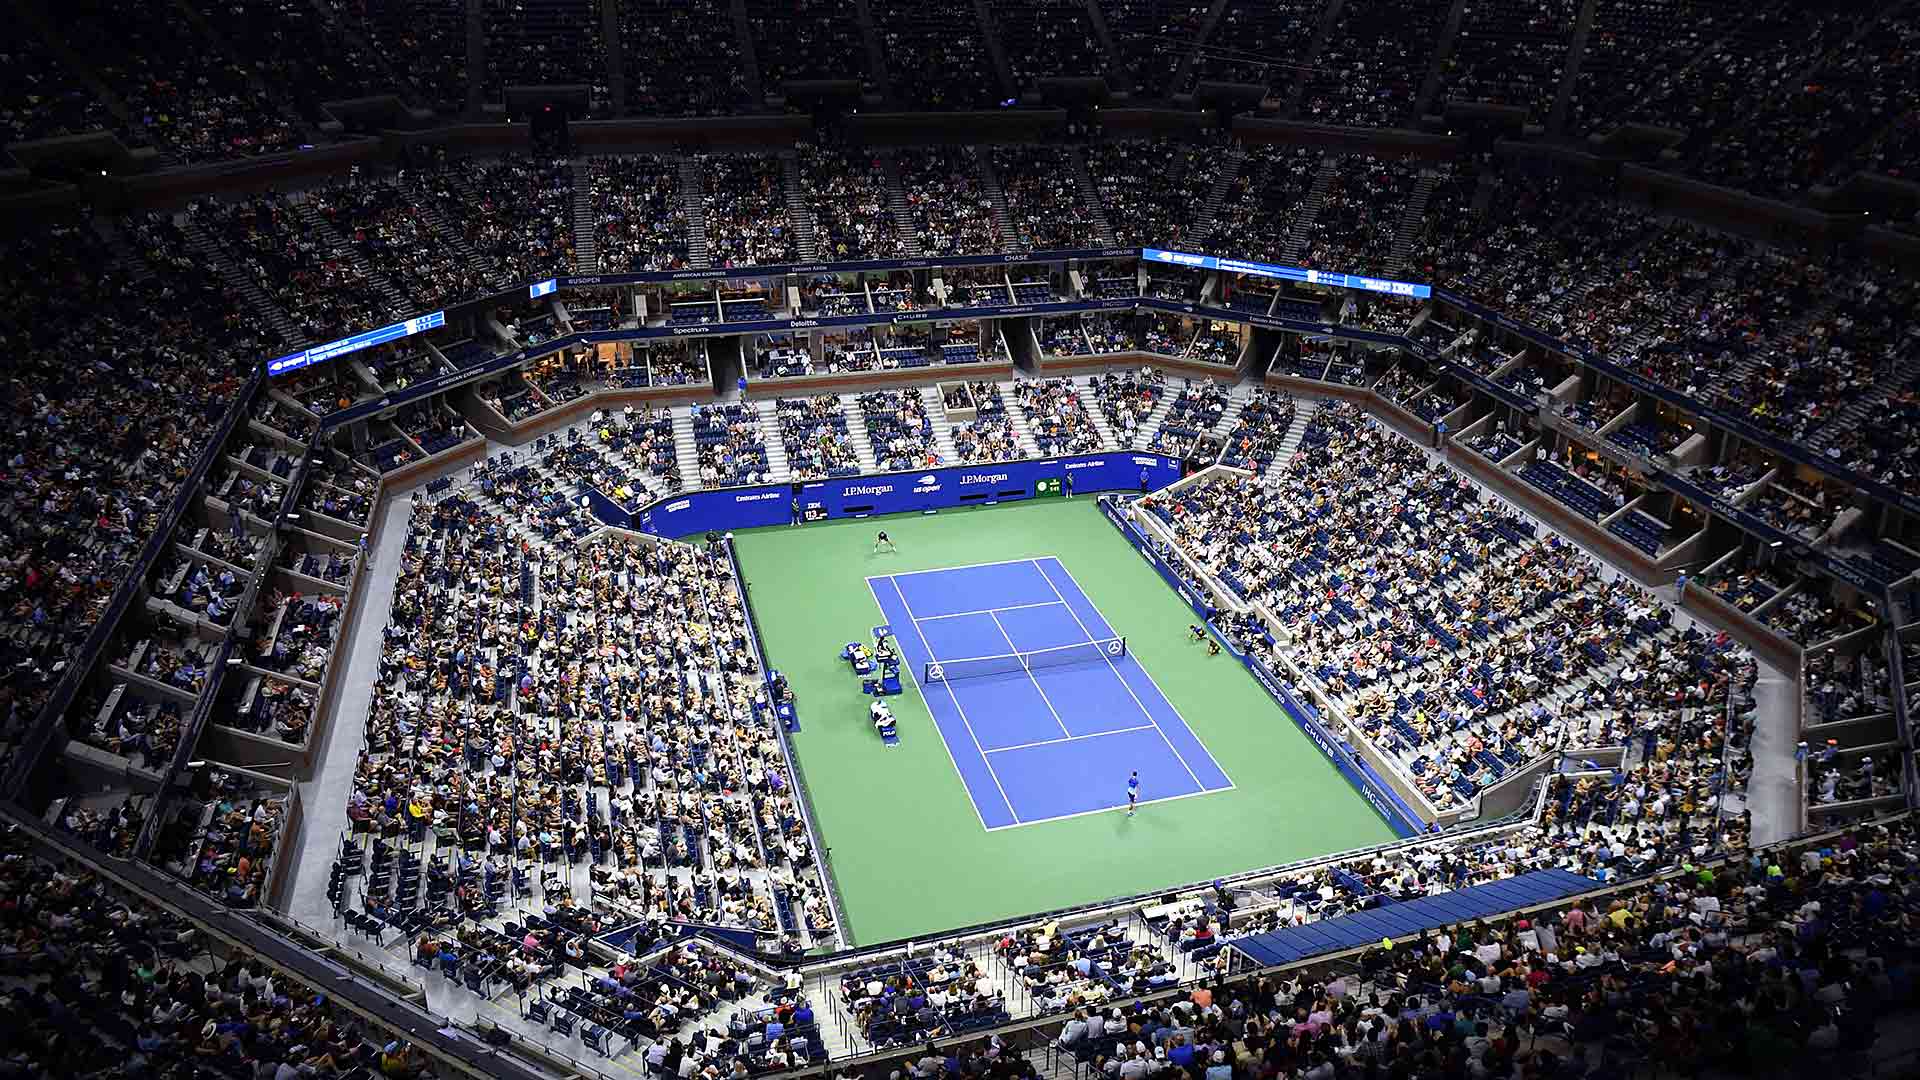 Sony Pictures Networks India acquires exclusive Television & Digital rights for US Open; becomes premier destination for tennis in India